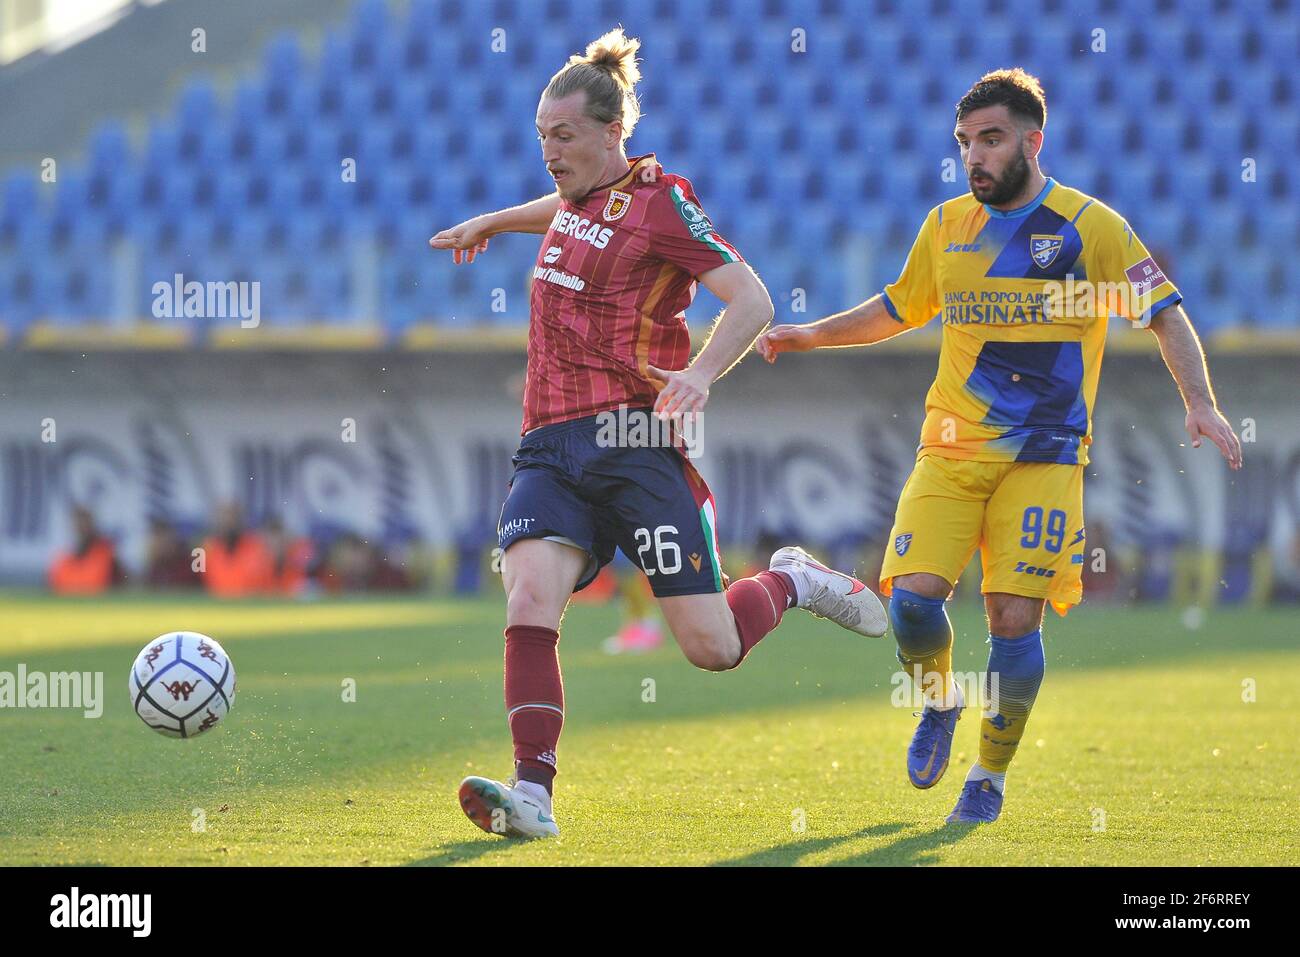 Frosinone, Italy. 02nd Apr, 2021. Niko Kirwan player of Reggiana during the  match of the Italian Serie B championship between Frosinone vs Reggiana  final result 0-0, match played at the Benito Stirpe